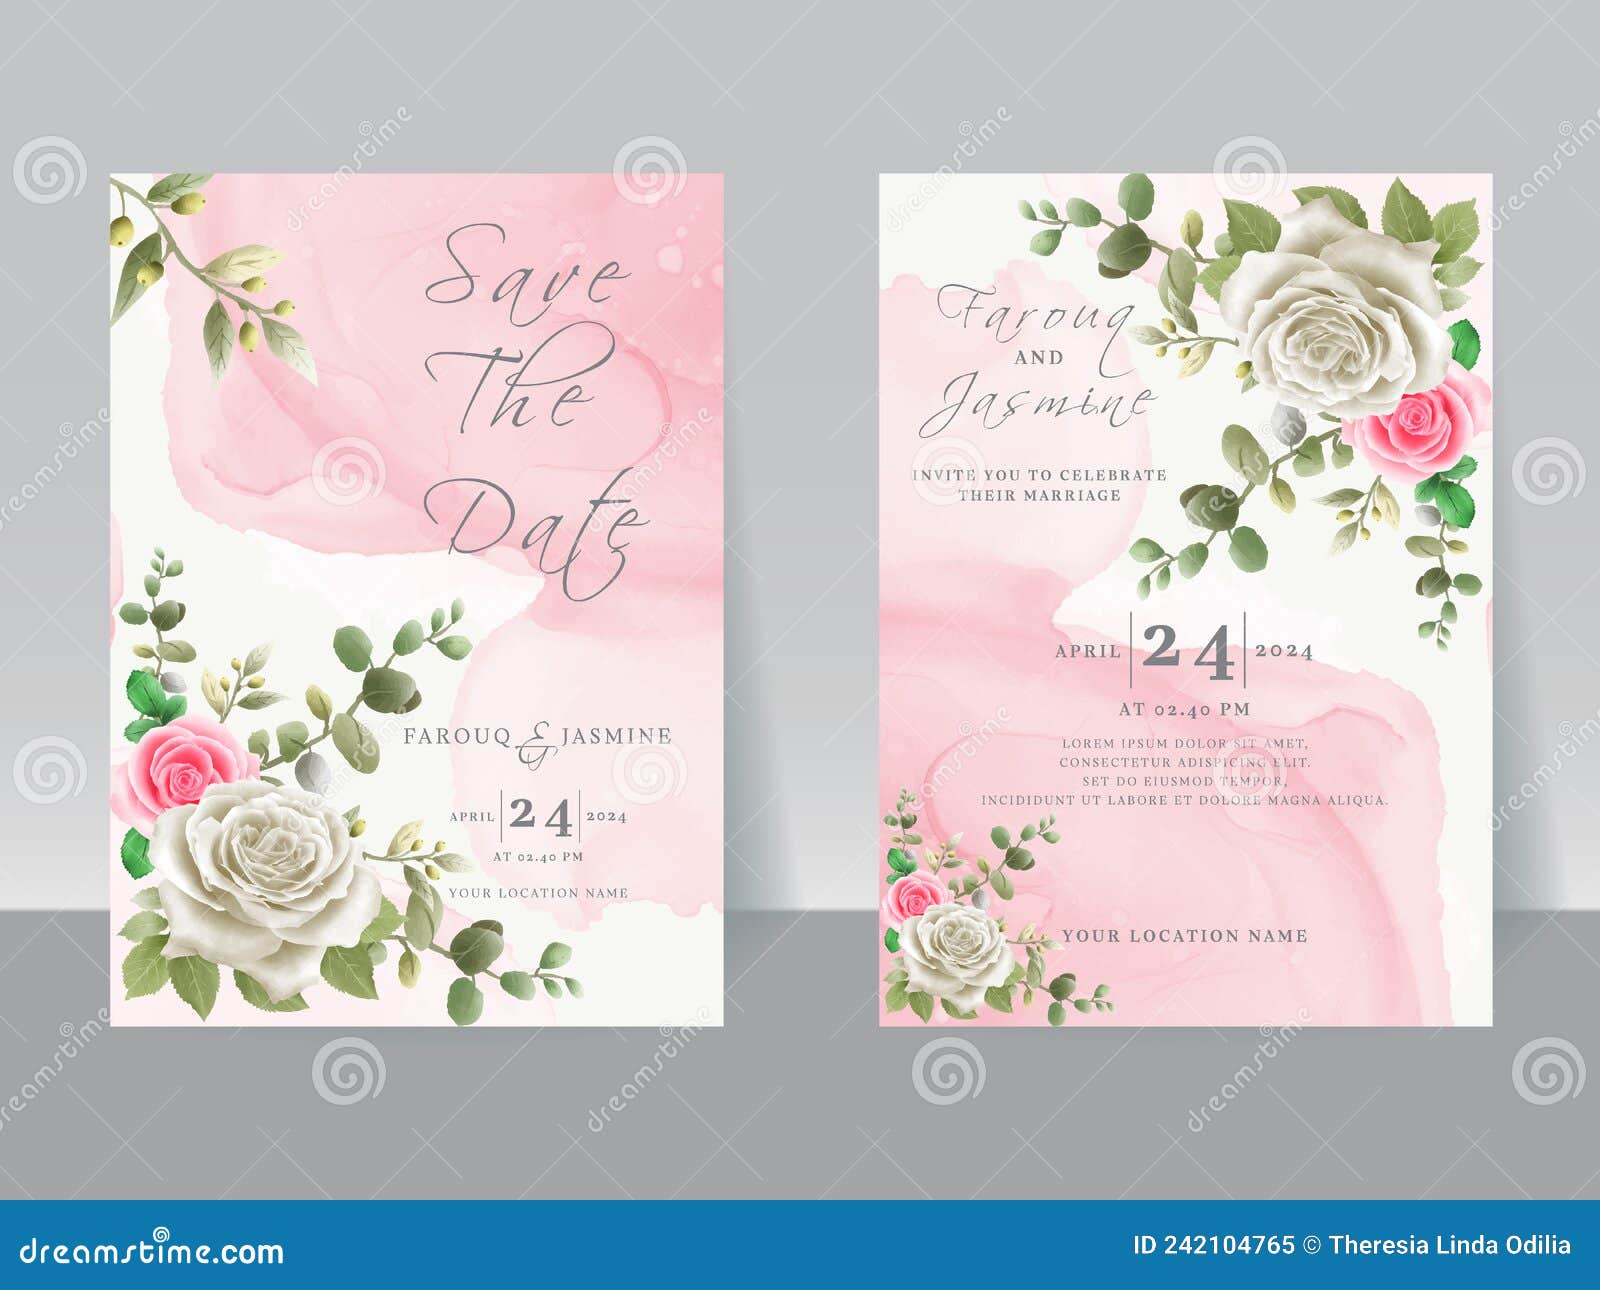 Vector Illustration Of Hand Drawn Floral Wedding Invitation Card Royalty  Free SVG, Cliparts, Vectors, and Stock Illustration. Image 94574594.